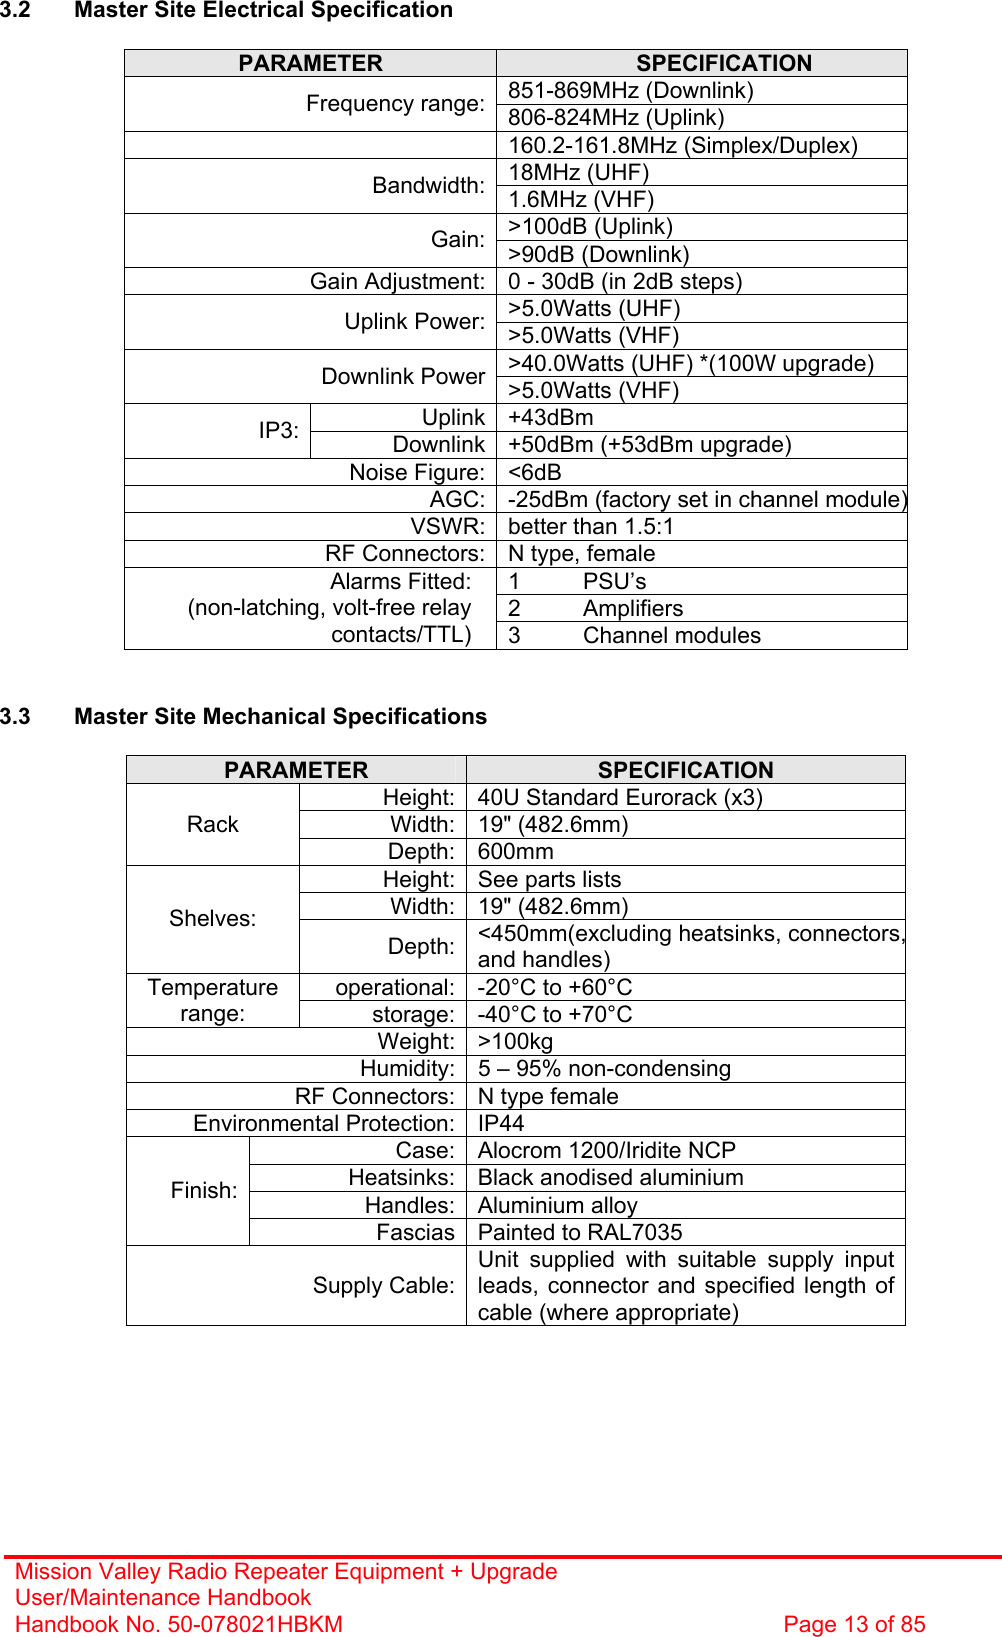 Mission Valley Radio Repeater Equipment + Upgrade User/Maintenance Handbook Handbook No. 50-078021HBKM  Page 13 of 85   3.2  Master Site Electrical Specification  PARAMETER  SPECIFICATION 851-869MHz (Downlink) Frequency range: 806-824MHz (Uplink) 160.2-161.8MHz (Simplex/Duplex) 18MHz (UHF) Bandwidth: 1.6MHz (VHF) &gt;100dB (Uplink) Gain: &gt;90dB (Downlink) Gain Adjustment: 0 - 30dB (in 2dB steps) &gt;5.0Watts (UHF) Uplink Power: &gt;5.0Watts (VHF) &gt;40.0Watts (UHF) *(100W upgrade) Downlink Power &gt;5.0Watts (VHF) Uplink +43dBm IP3:   Downlink +50dBm (+53dBm upgrade) Noise Figure: &lt;6dB AGC: -25dBm (factory set in channel module)VSWR: better than 1.5:1 RF Connectors: N type, female 1 PSU’s 2 Amplifiers Alarms Fitted: (non-latching, volt-free relay contacts/TTL)  3 Channel modules   3.3  Master Site Mechanical Specifications  PARAMETER  SPECIFICATION Height: 40U Standard Eurorack (x3) Width: 19&quot; (482.6mm) Rack Depth: 600mm Height: See parts lists Width: 19&quot; (482.6mm) Shelves: Depth: &lt;450mm(excluding heatsinks, connectors,and handles) operational: -20°C to +60°C Temperature range:  storage: -40°C to +70°C Weight: &gt;100kg Humidity: 5 – 95% non-condensing RF Connectors: N type female Environmental Protection: IP44 Case: Alocrom 1200/Iridite NCP Heatsinks: Black anodised aluminium Handles: Aluminium alloy Finish: Fascias Painted to RAL7035 Supply Cable:Unit supplied with suitable supply input leads, connector and specified length of cable (where appropriate)   